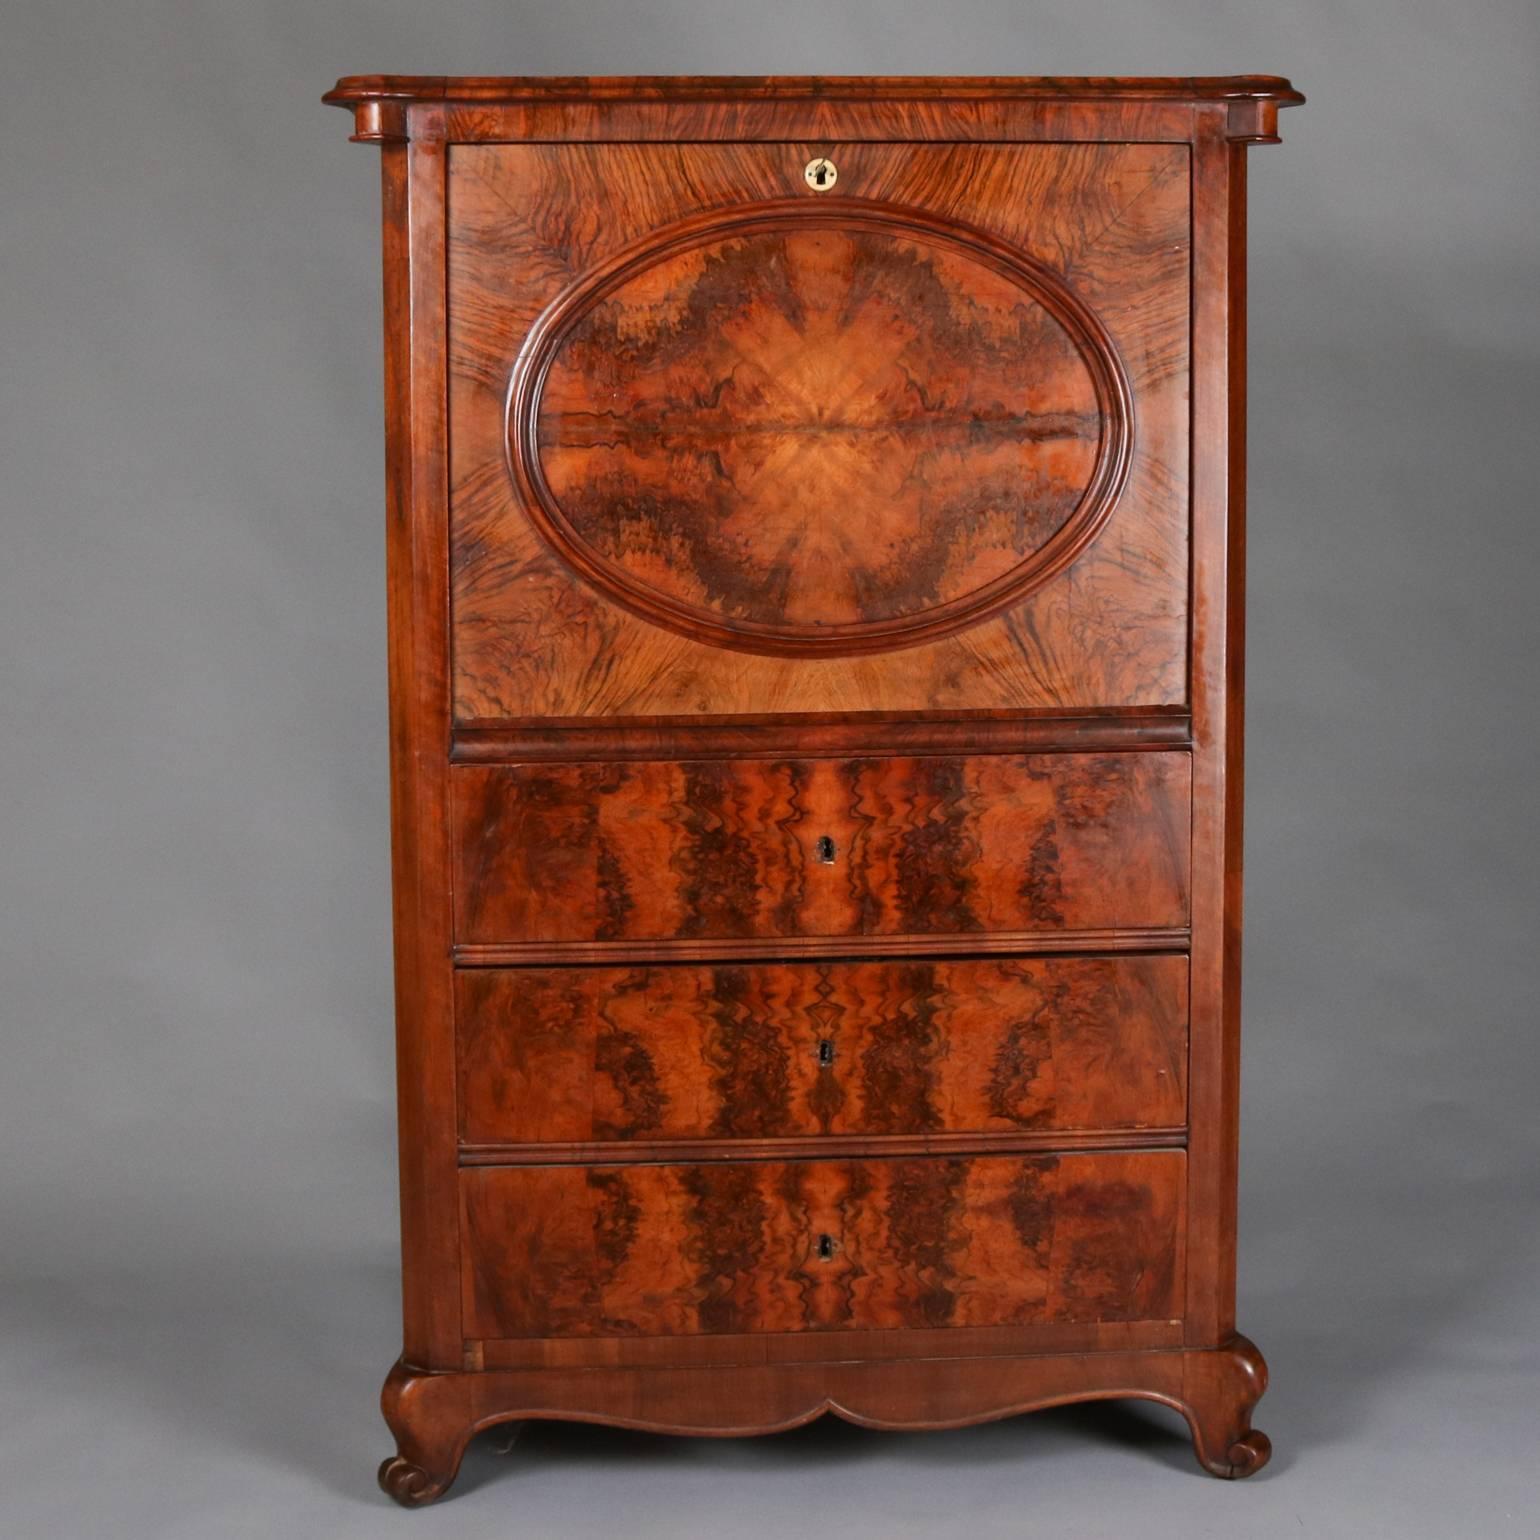 Antique Biedermeier burl walnut secretaire a' abattant (fall front secretary) features bookmatched central reserve with drop front opening to reveal writing surface and interior storage compartments above three long drawers and seated on scroll